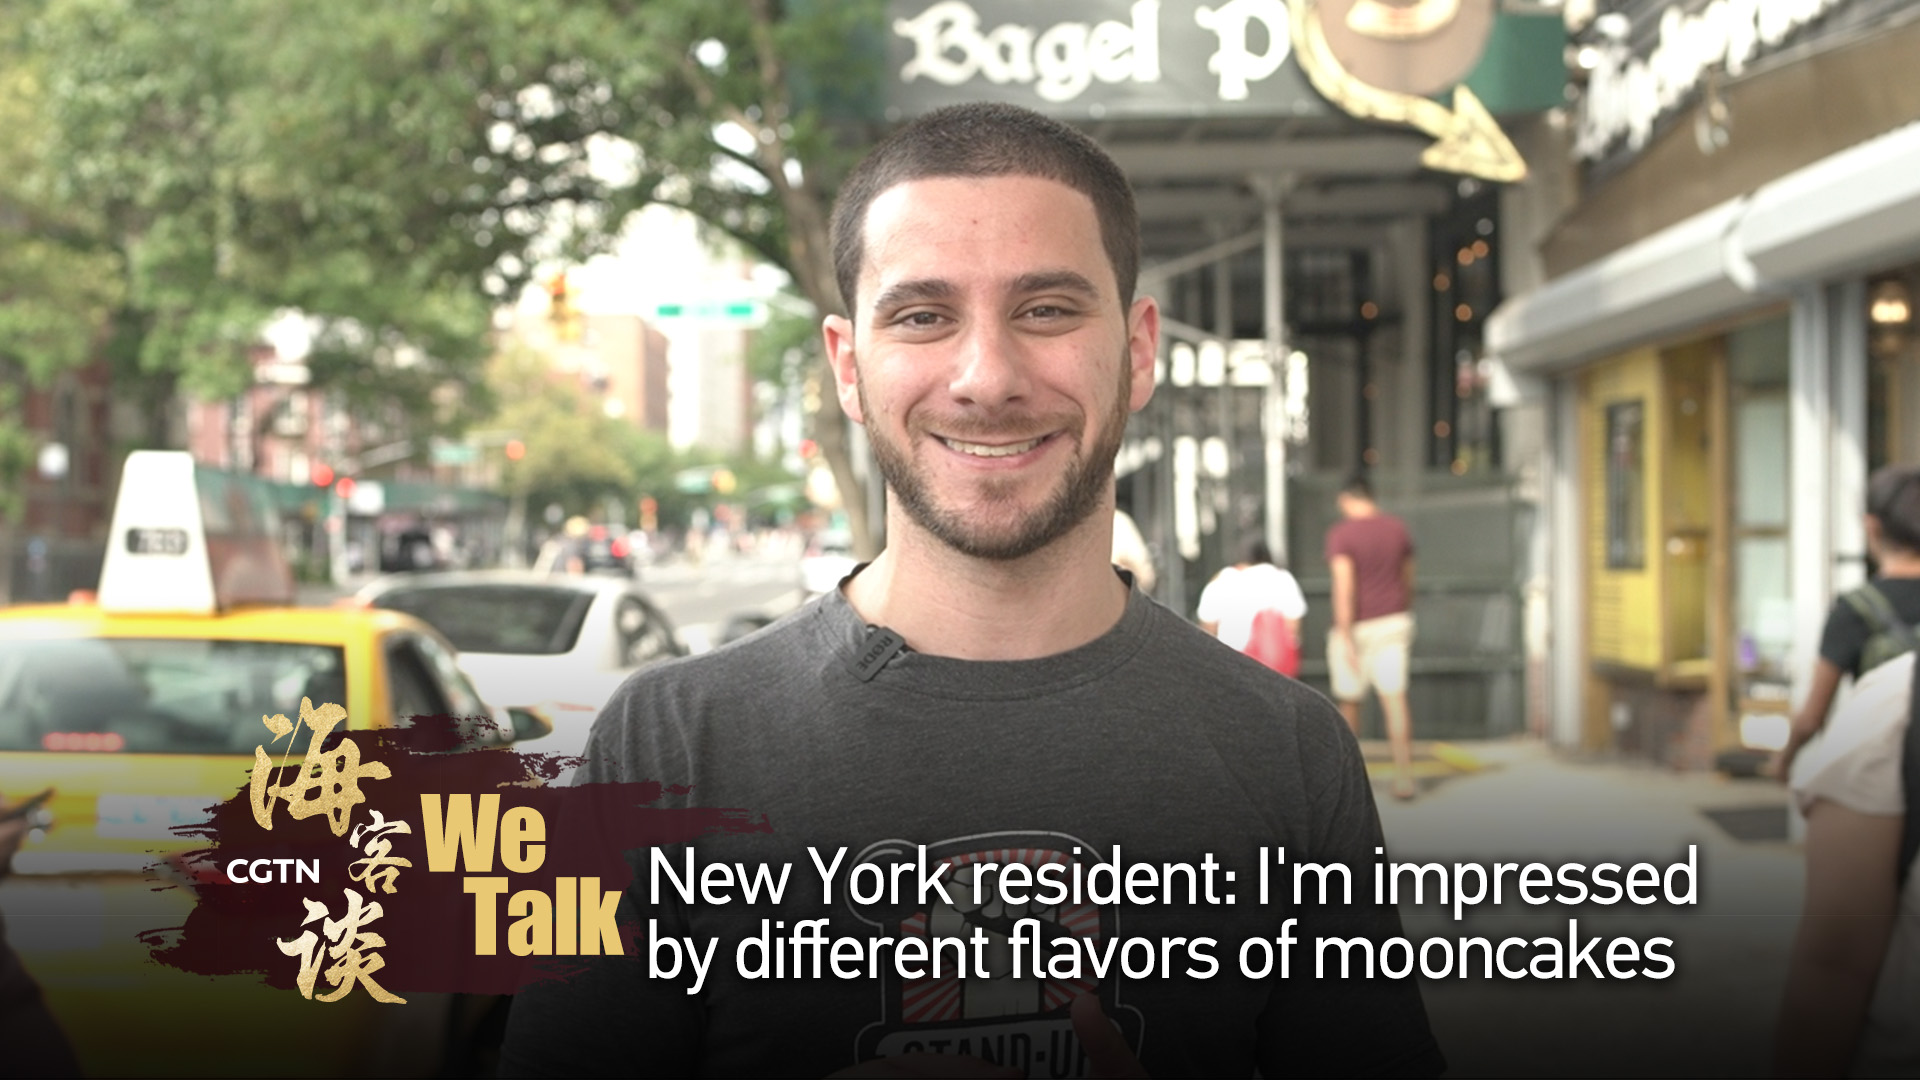 NYC resident impressed by different flavors of mooncakes